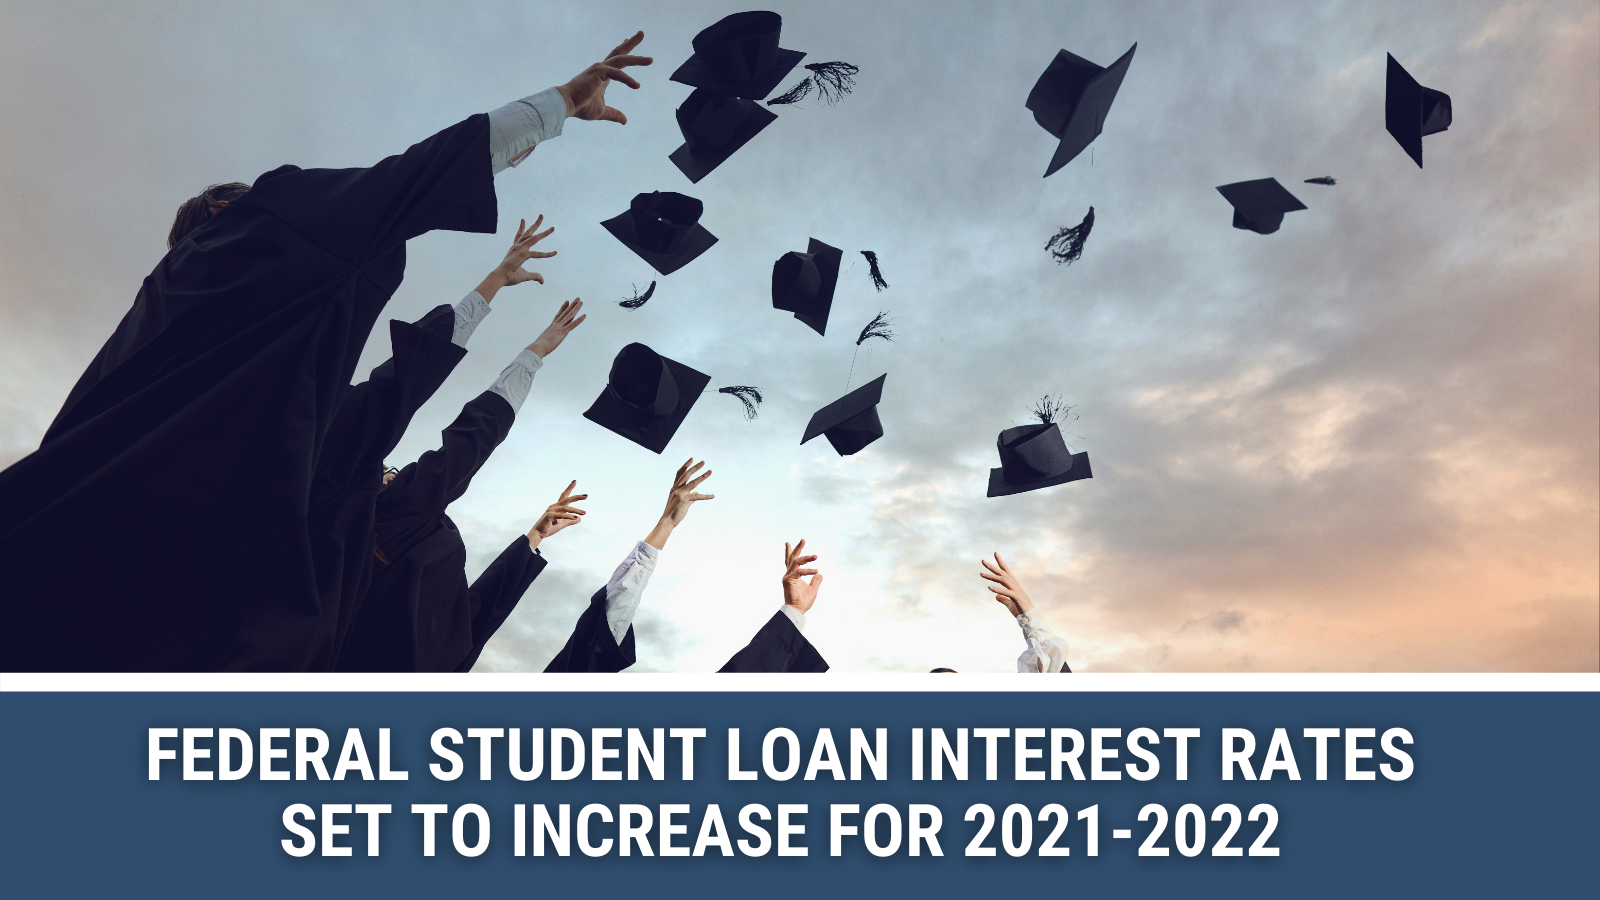 Federal Student Loan Interest Rates Set to Increase for 2021-2022